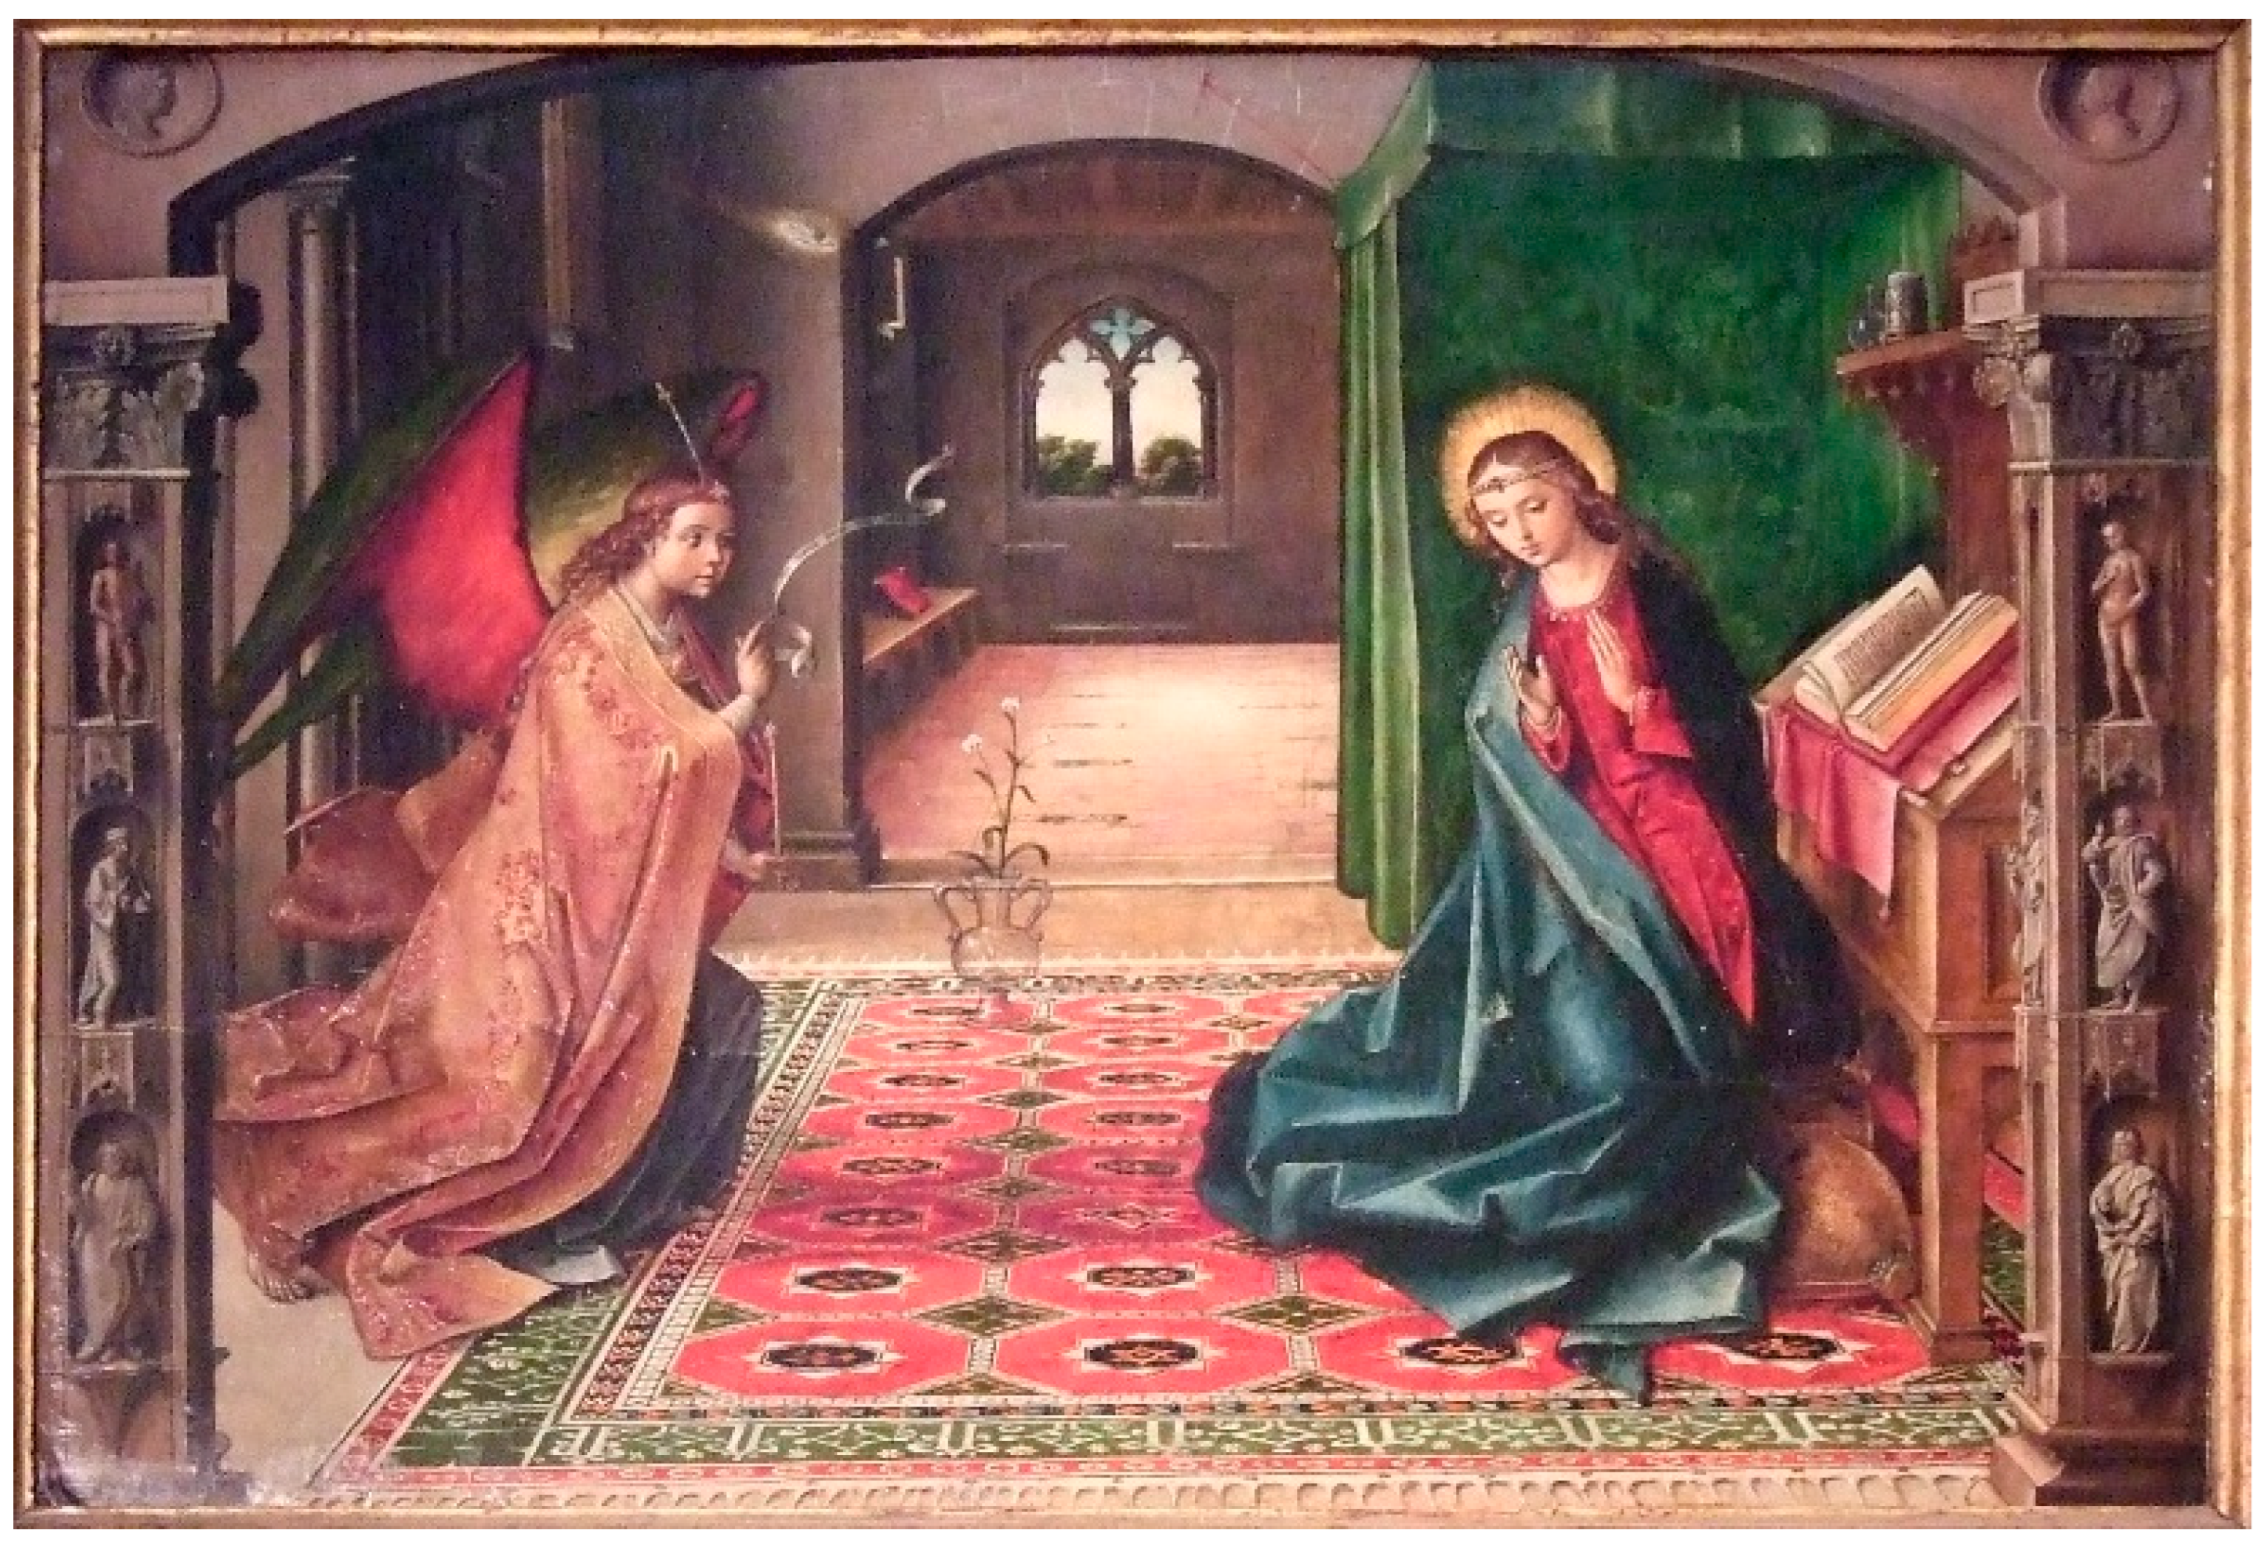 Annunciation of the Death of the Virgin (y1994-12)